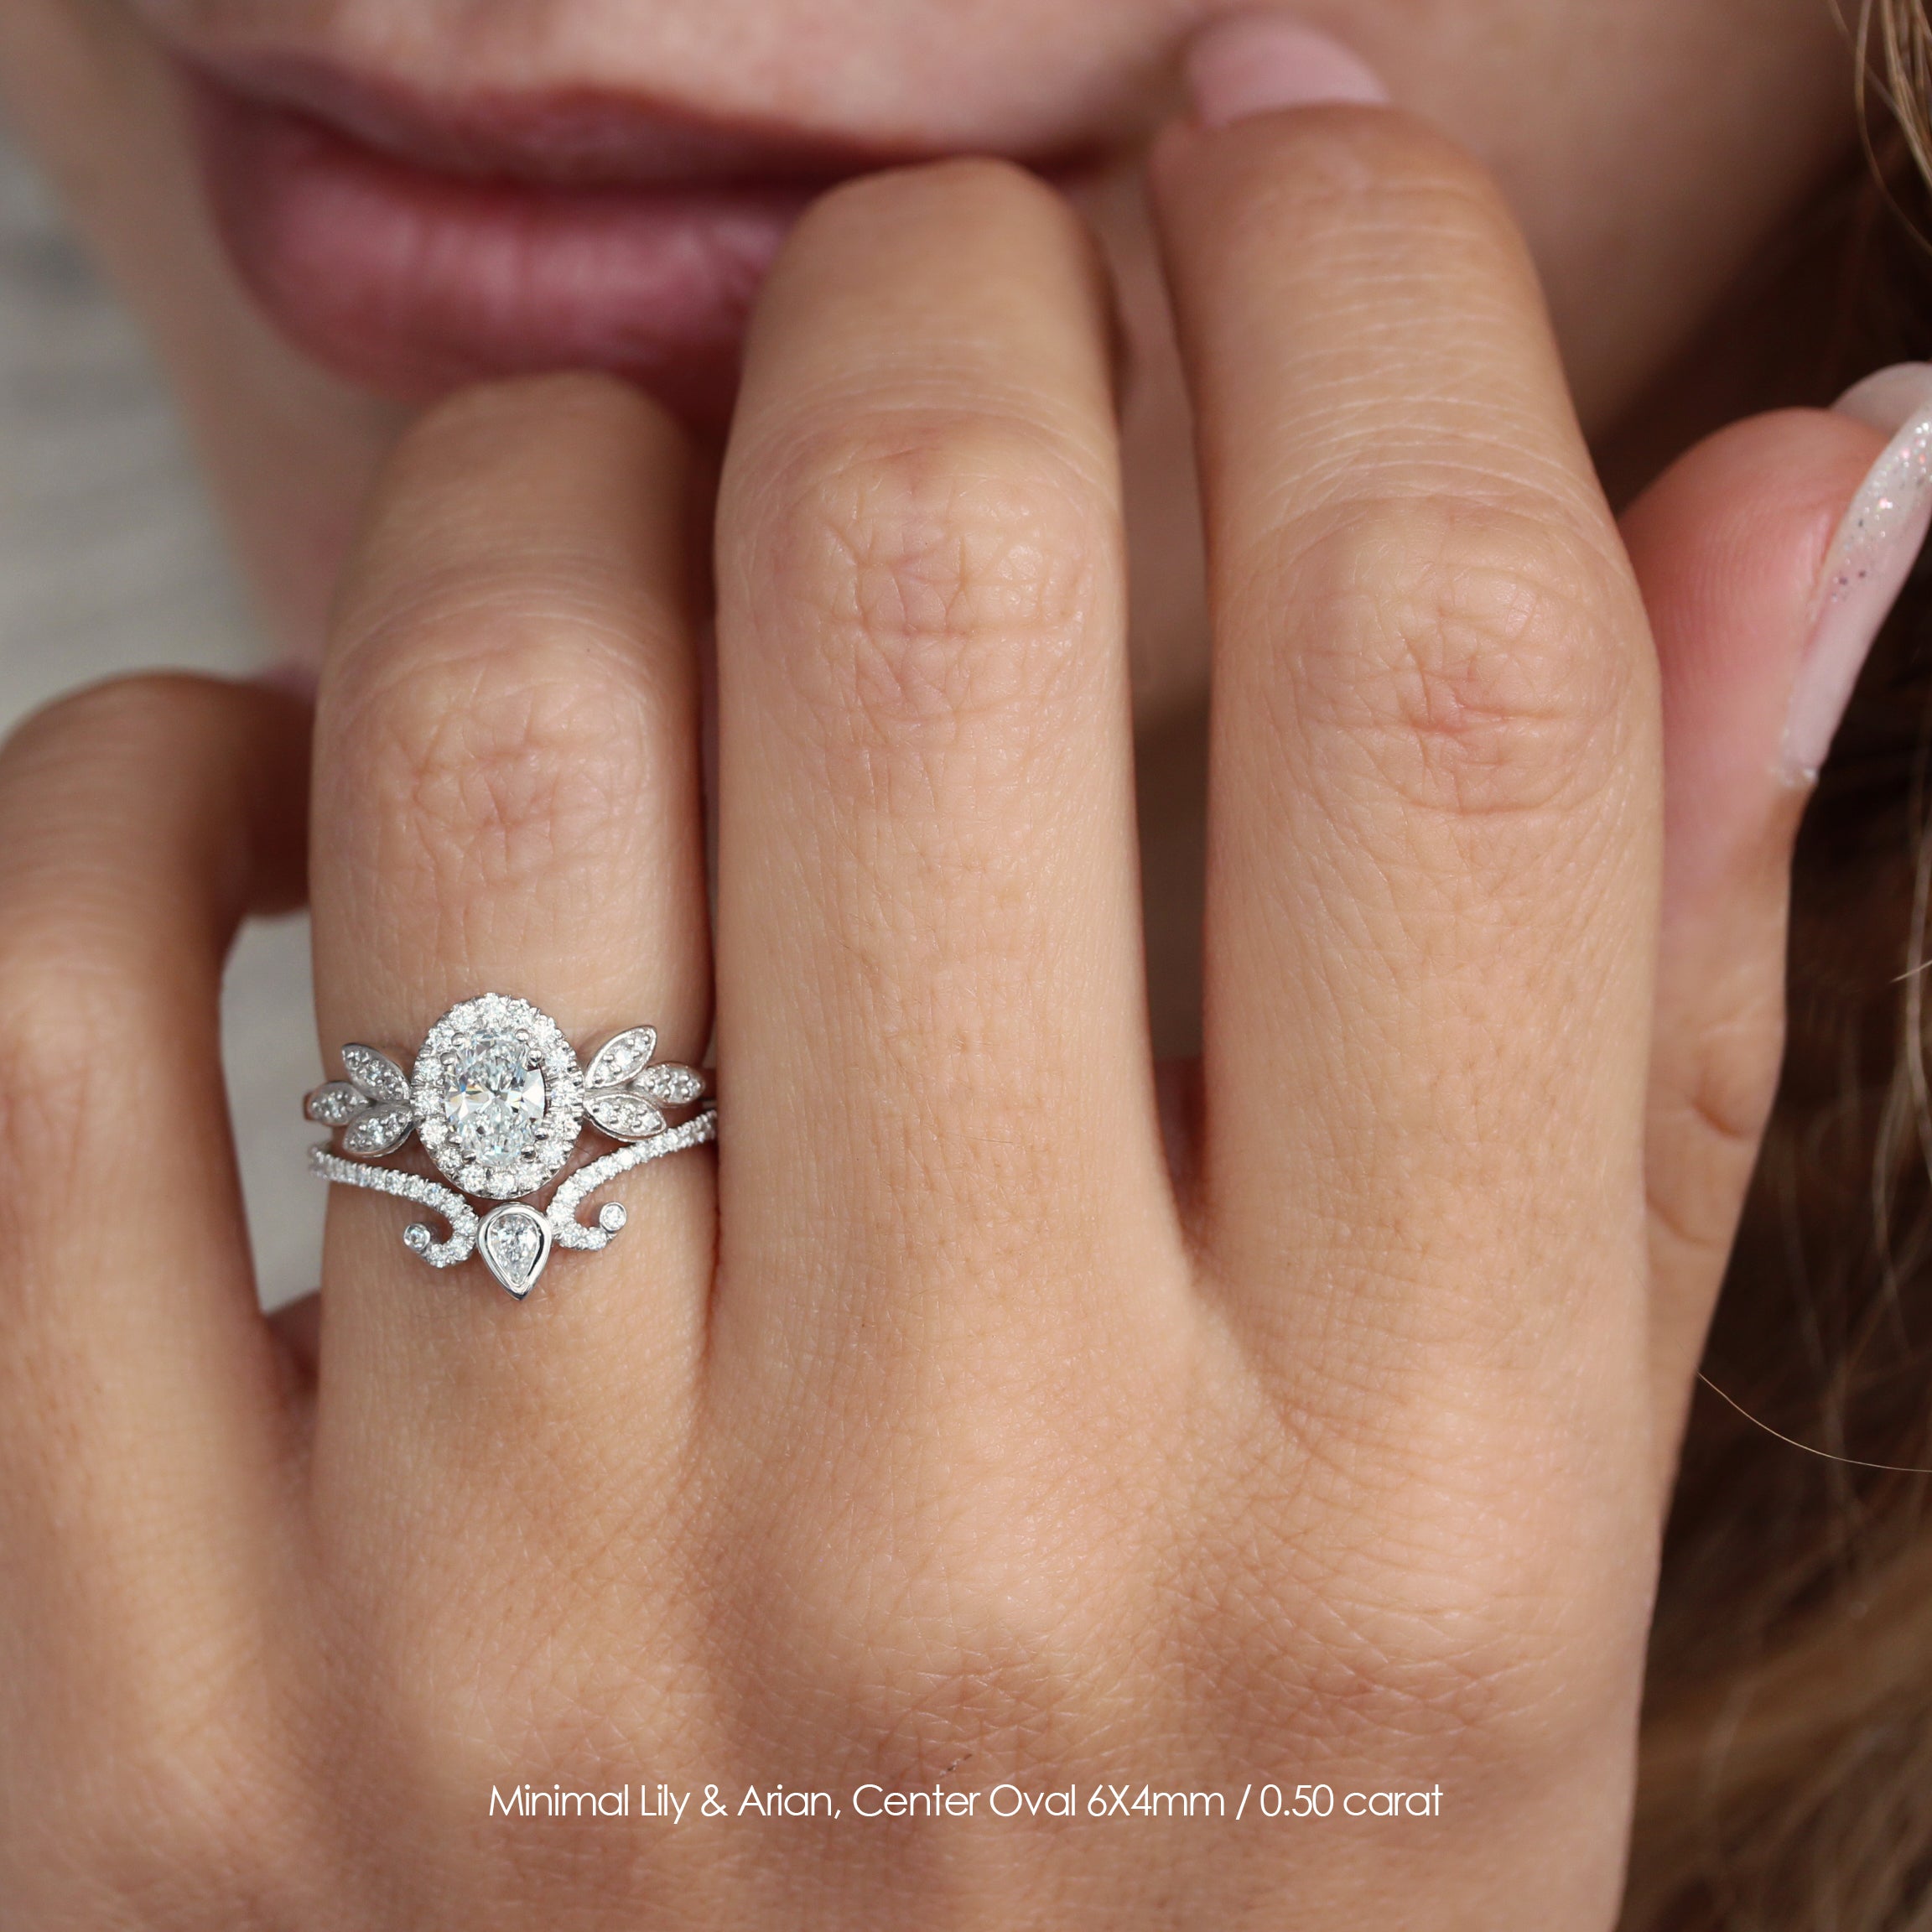 Oval Diamond Engagement Two Rings Set - Minimal Lily & Ariana ♥